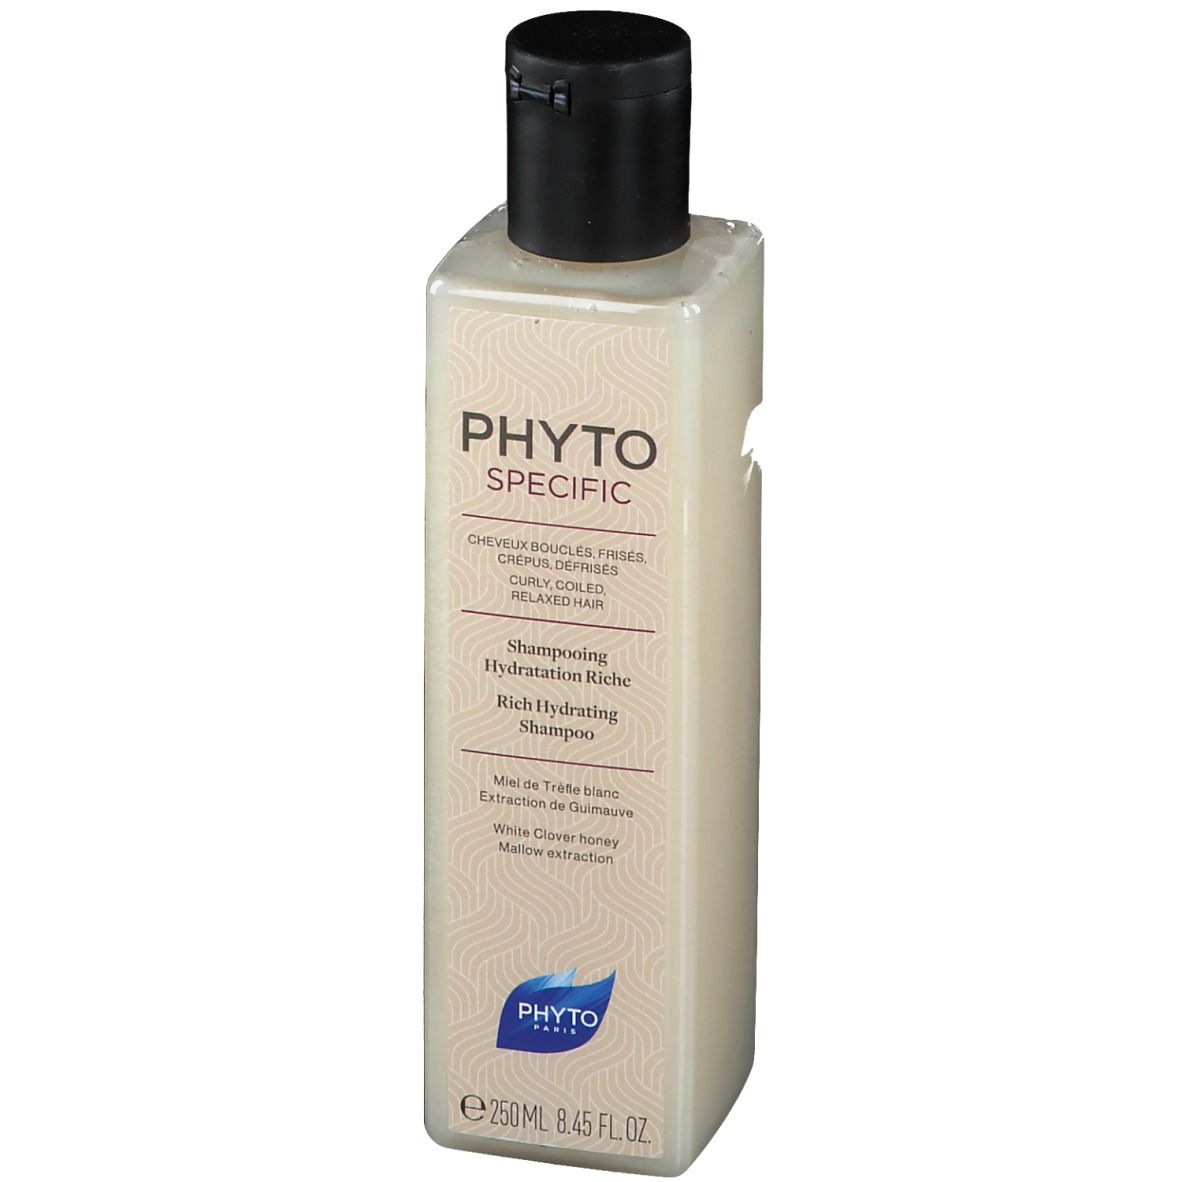 Phyto Phyto Specific Shampooing Hydratation Riche